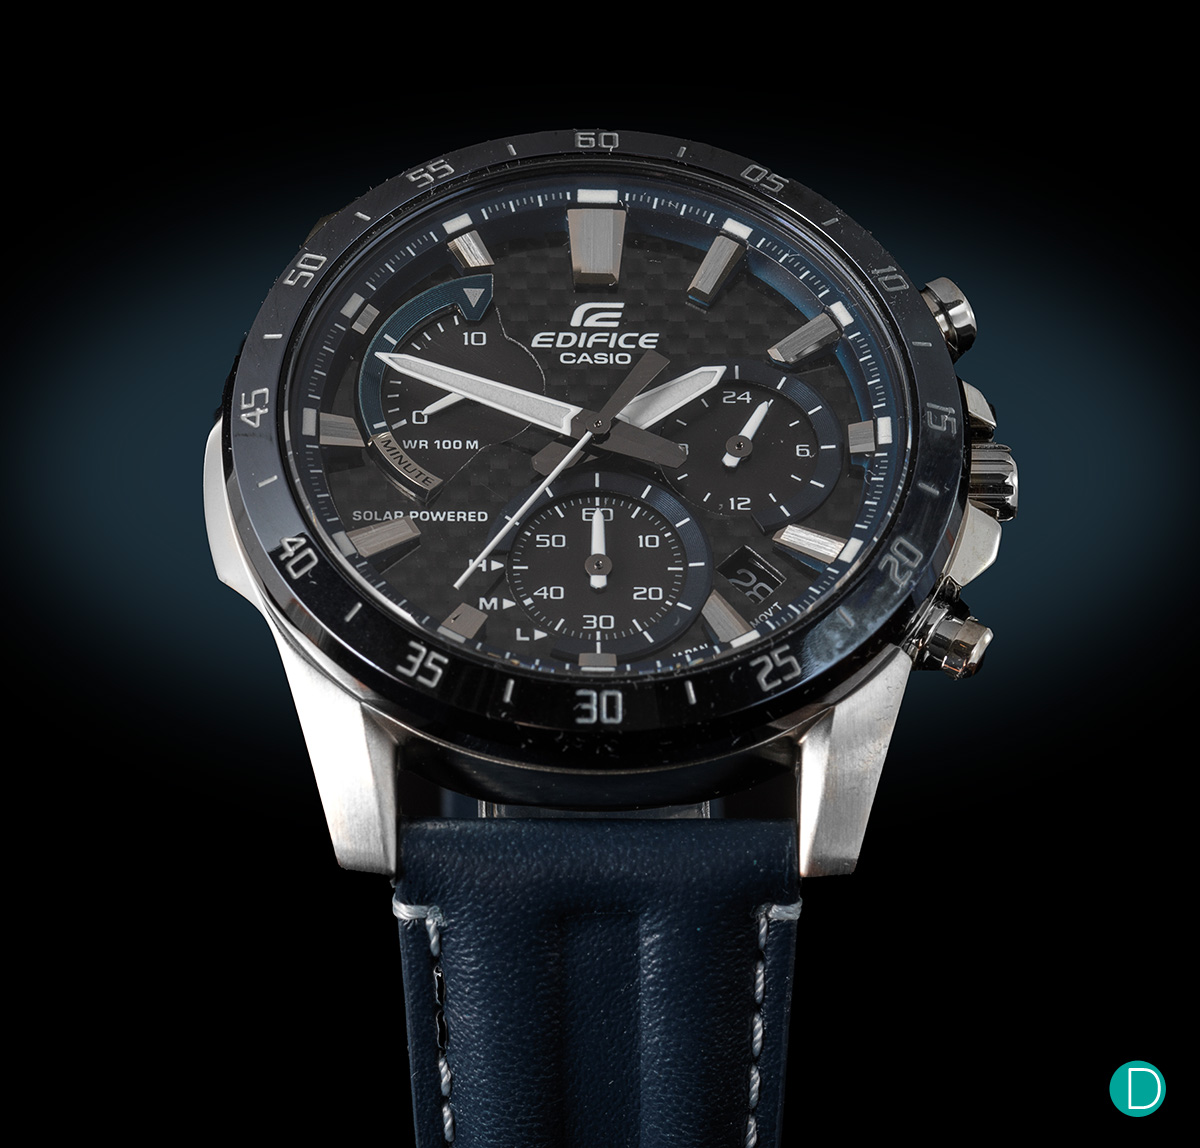 hands-on with the new Edifice EQS-930BL-2AVUDF -